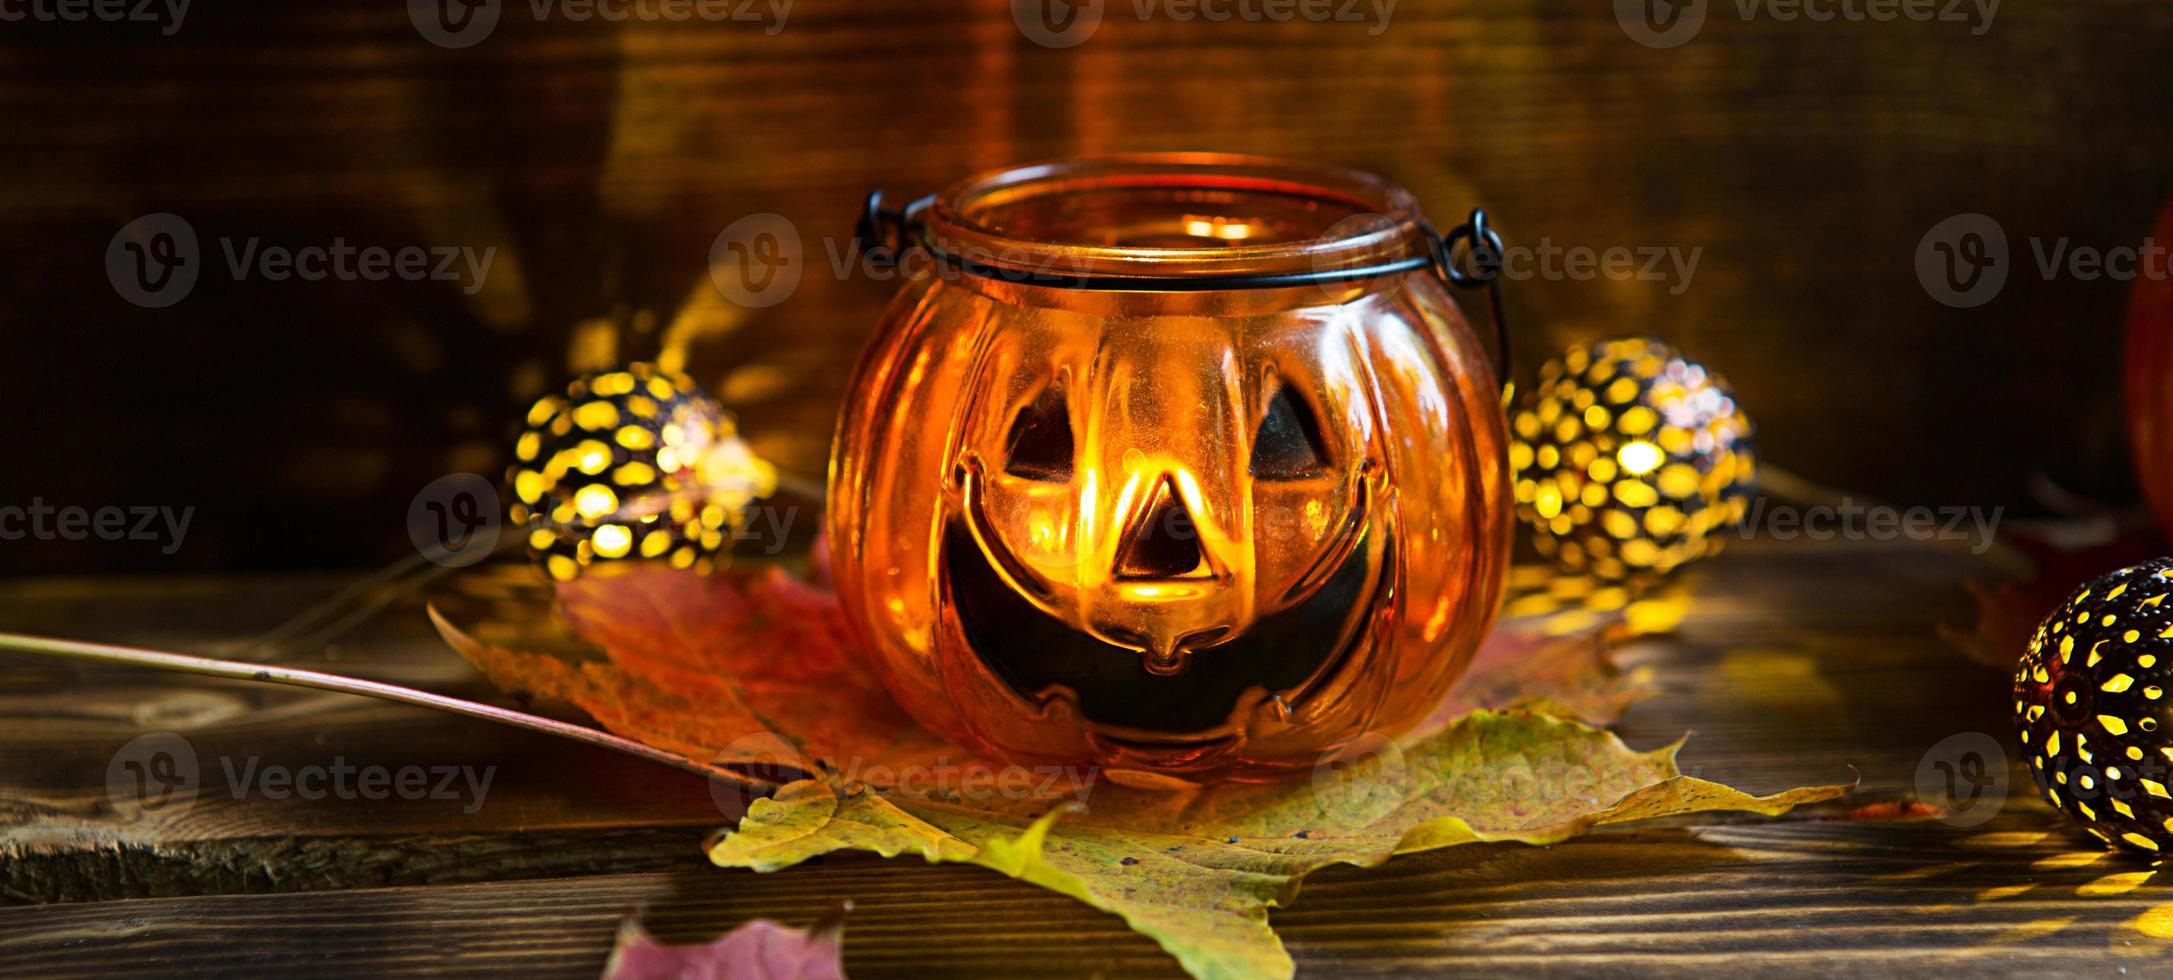 Lamp pumpkin with eyes and mouth made of glass and natural orange pumpkin on a wooden table with yellow and red maple leaves. Halloween, warm autumn atmosphere. Round garland, candle in a candlestick. photo